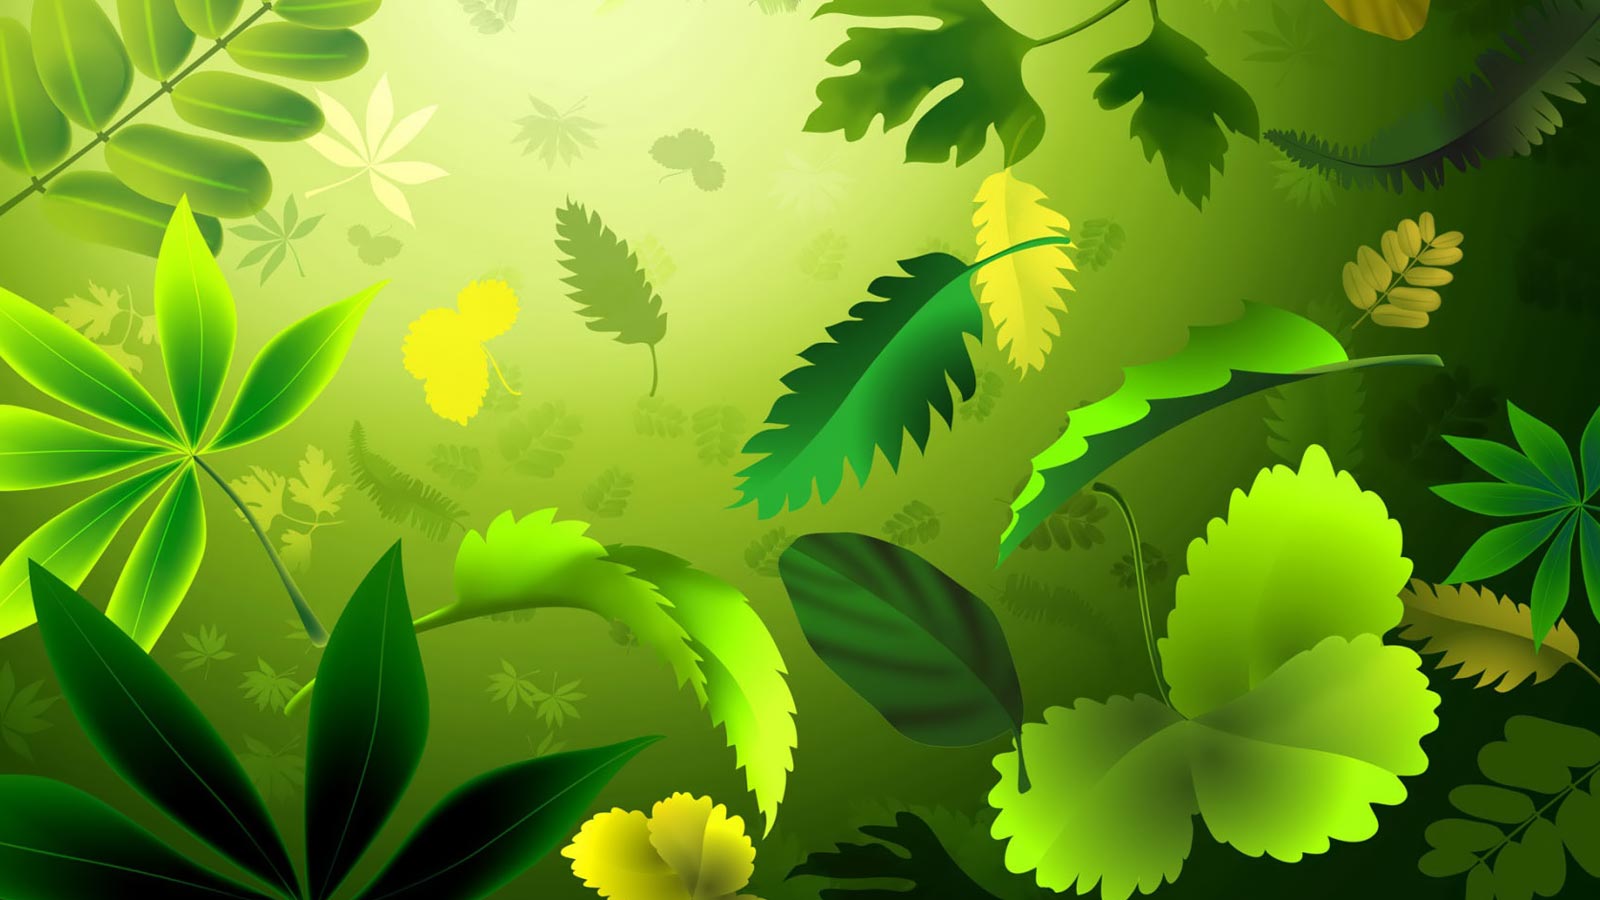 Nature Book Background Wallpaper